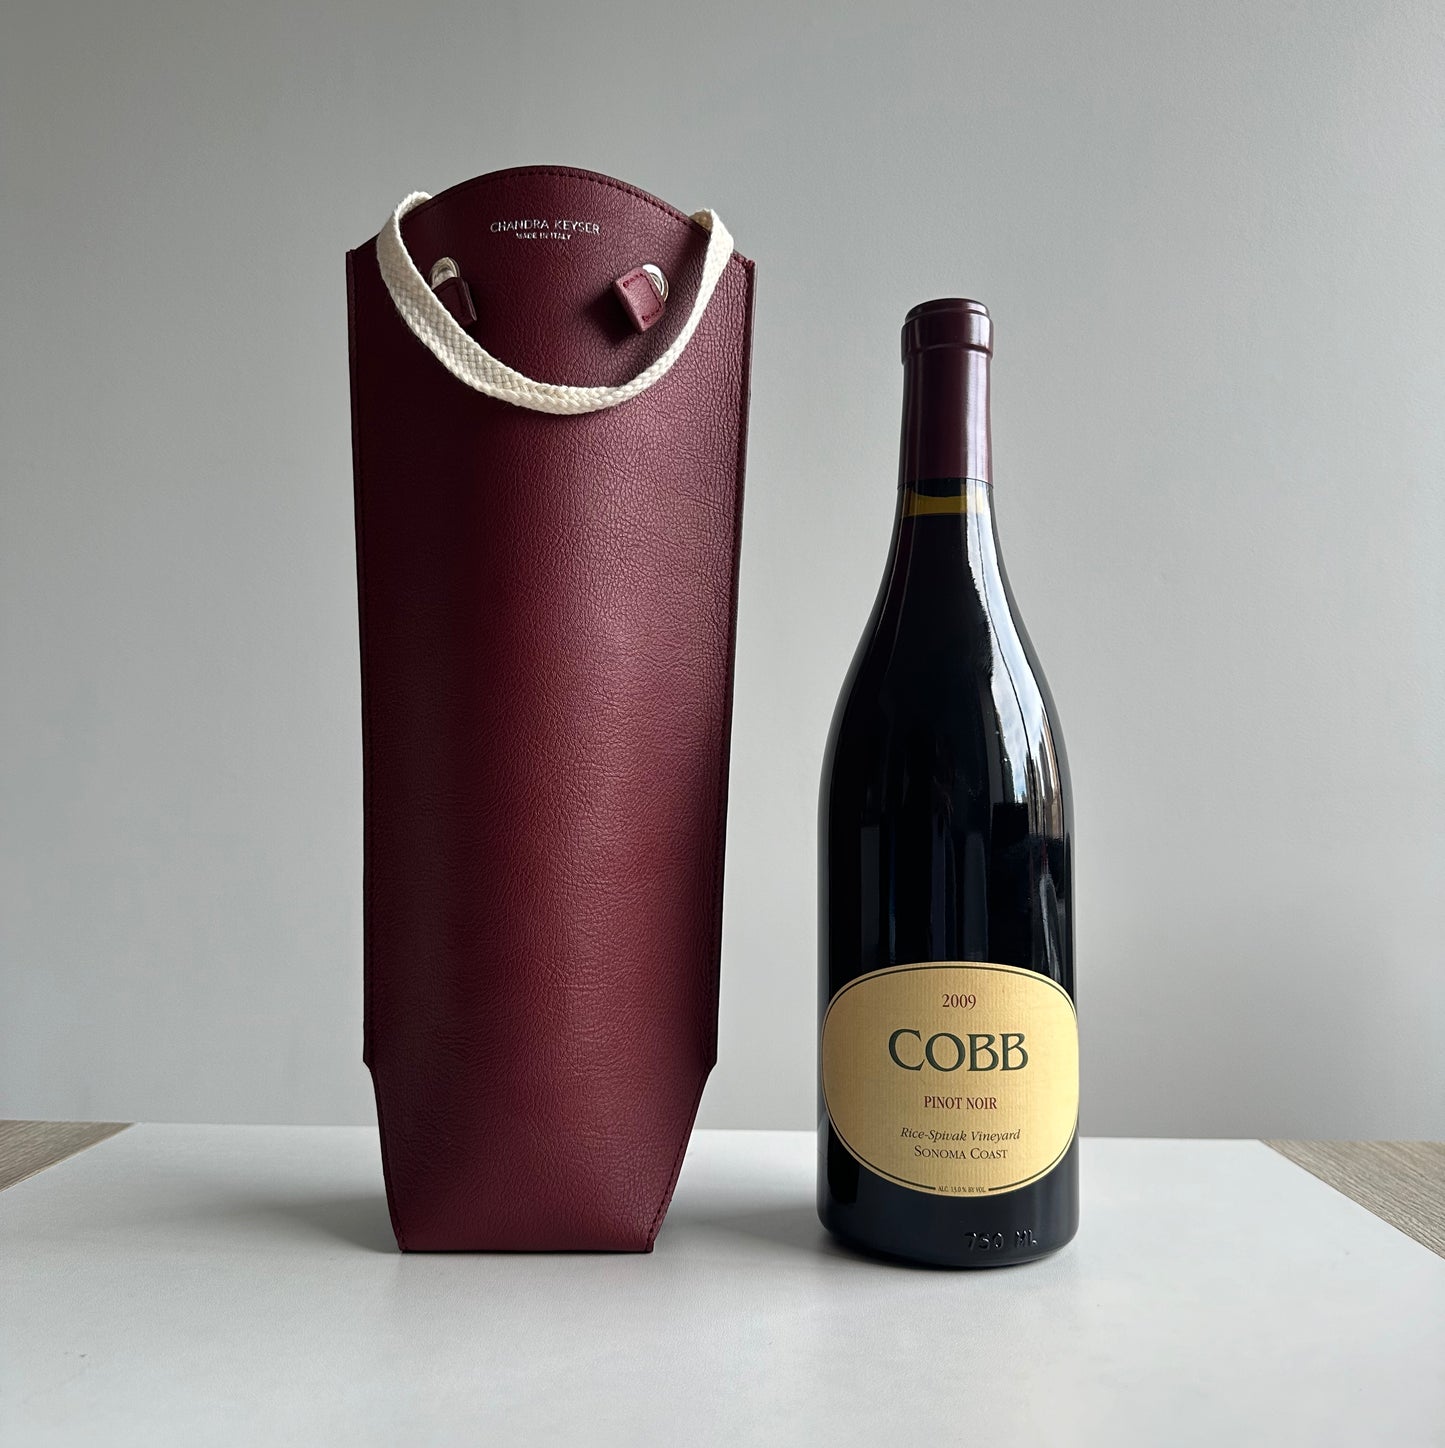 Burgendy Red Bag Wine Carrier Sustainable Luxury Gift Circular Product Supports the Environment sitting on a round table with white wall in the background and bottle of Cobb Wine 2009